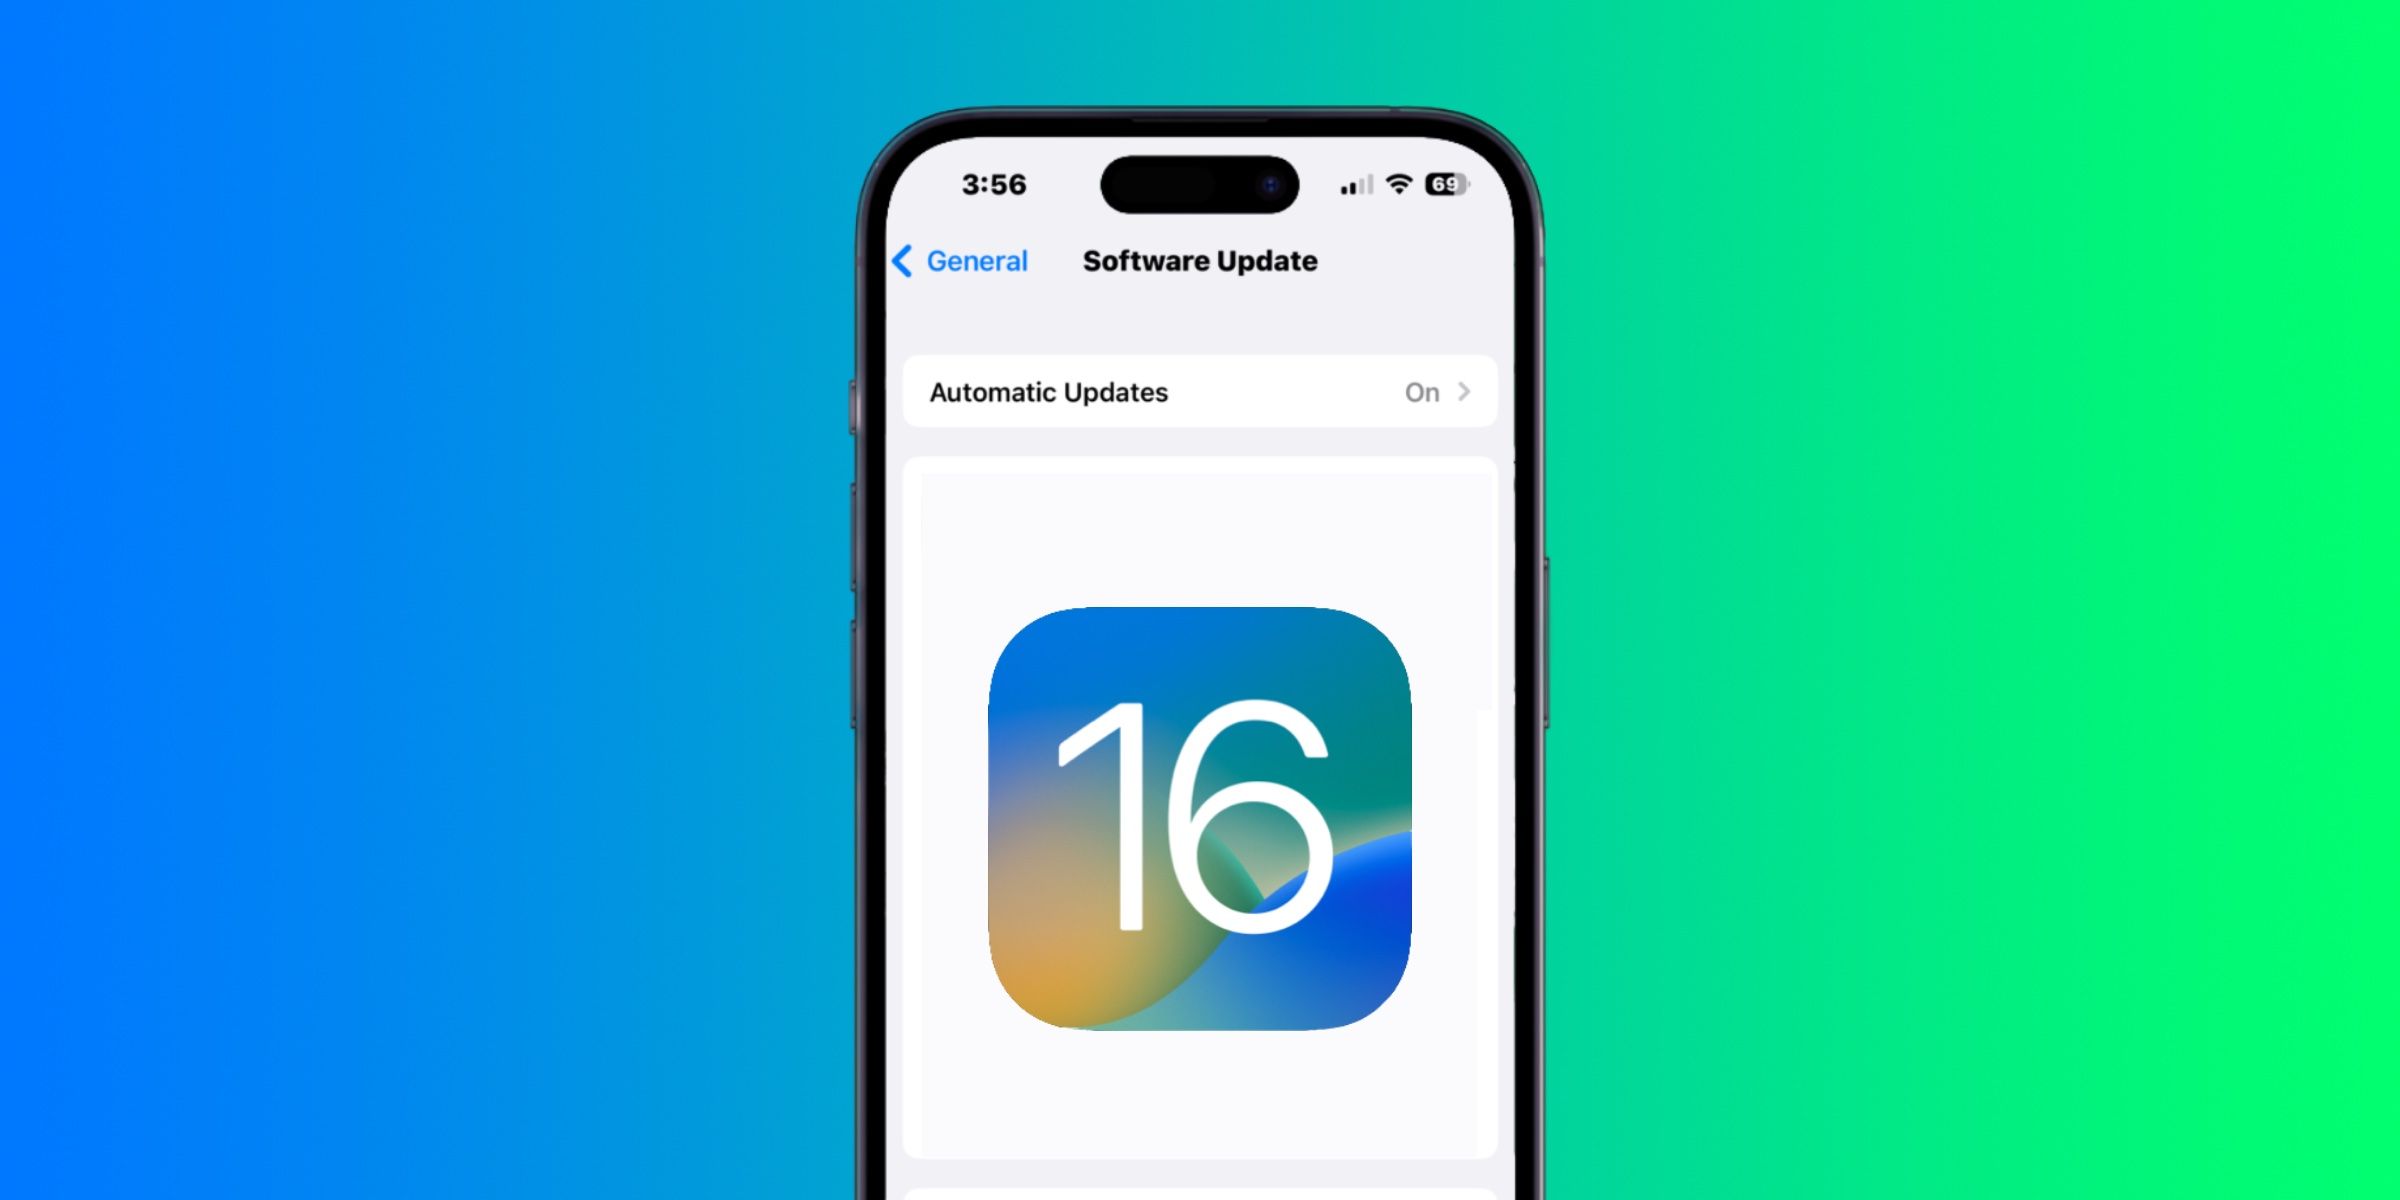 The iOS 16 logo on an iPhone 14 Pro against a blue and green gradient background.